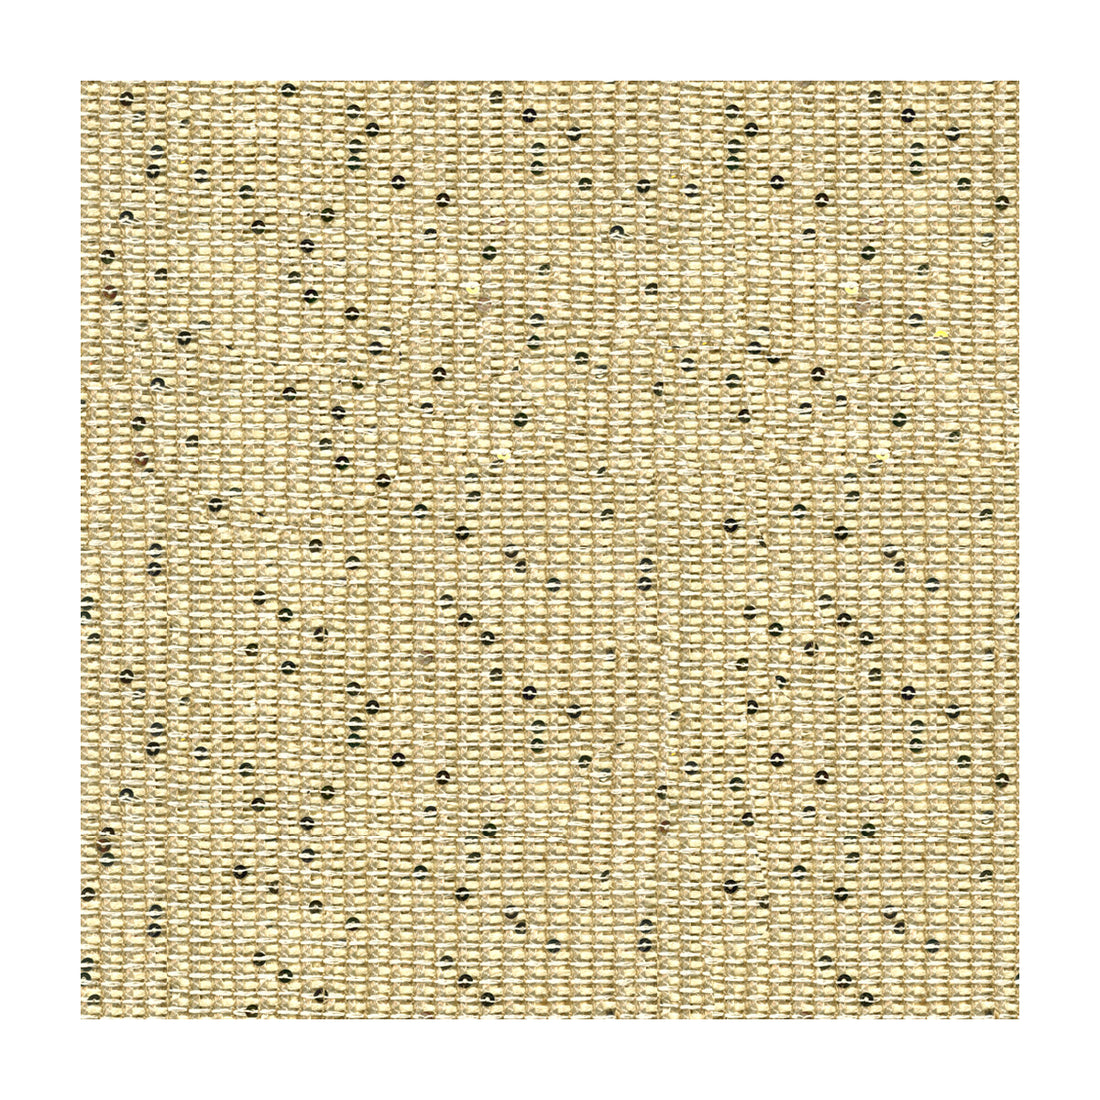 The High Life fabric in champagne color - pattern 3973.1.0 - by Kravet Couture in the Modern Luxe collection